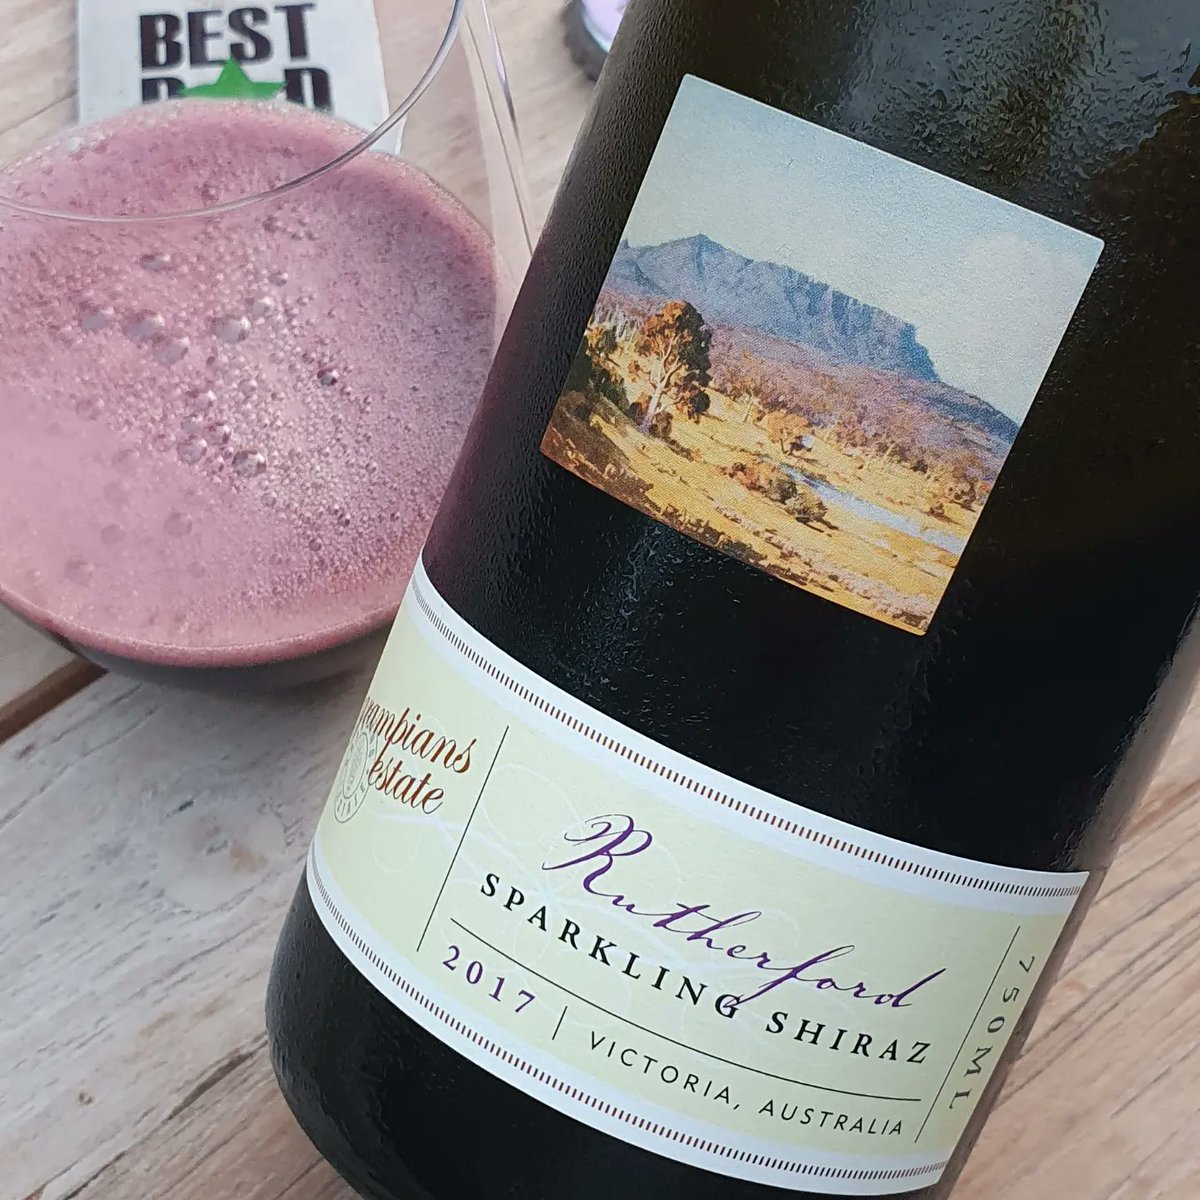 Grampians Estate Rutherford Sparkling Shiraz 2017 Nothing better than Sparkling Shiraz for breakfast with egg and bacon roll from the BBQ. When it's forecast 38 degrees 😳 you need to get the good stuff in early. Drink the good stuff 🍷 @grampiansestate @grampianswine